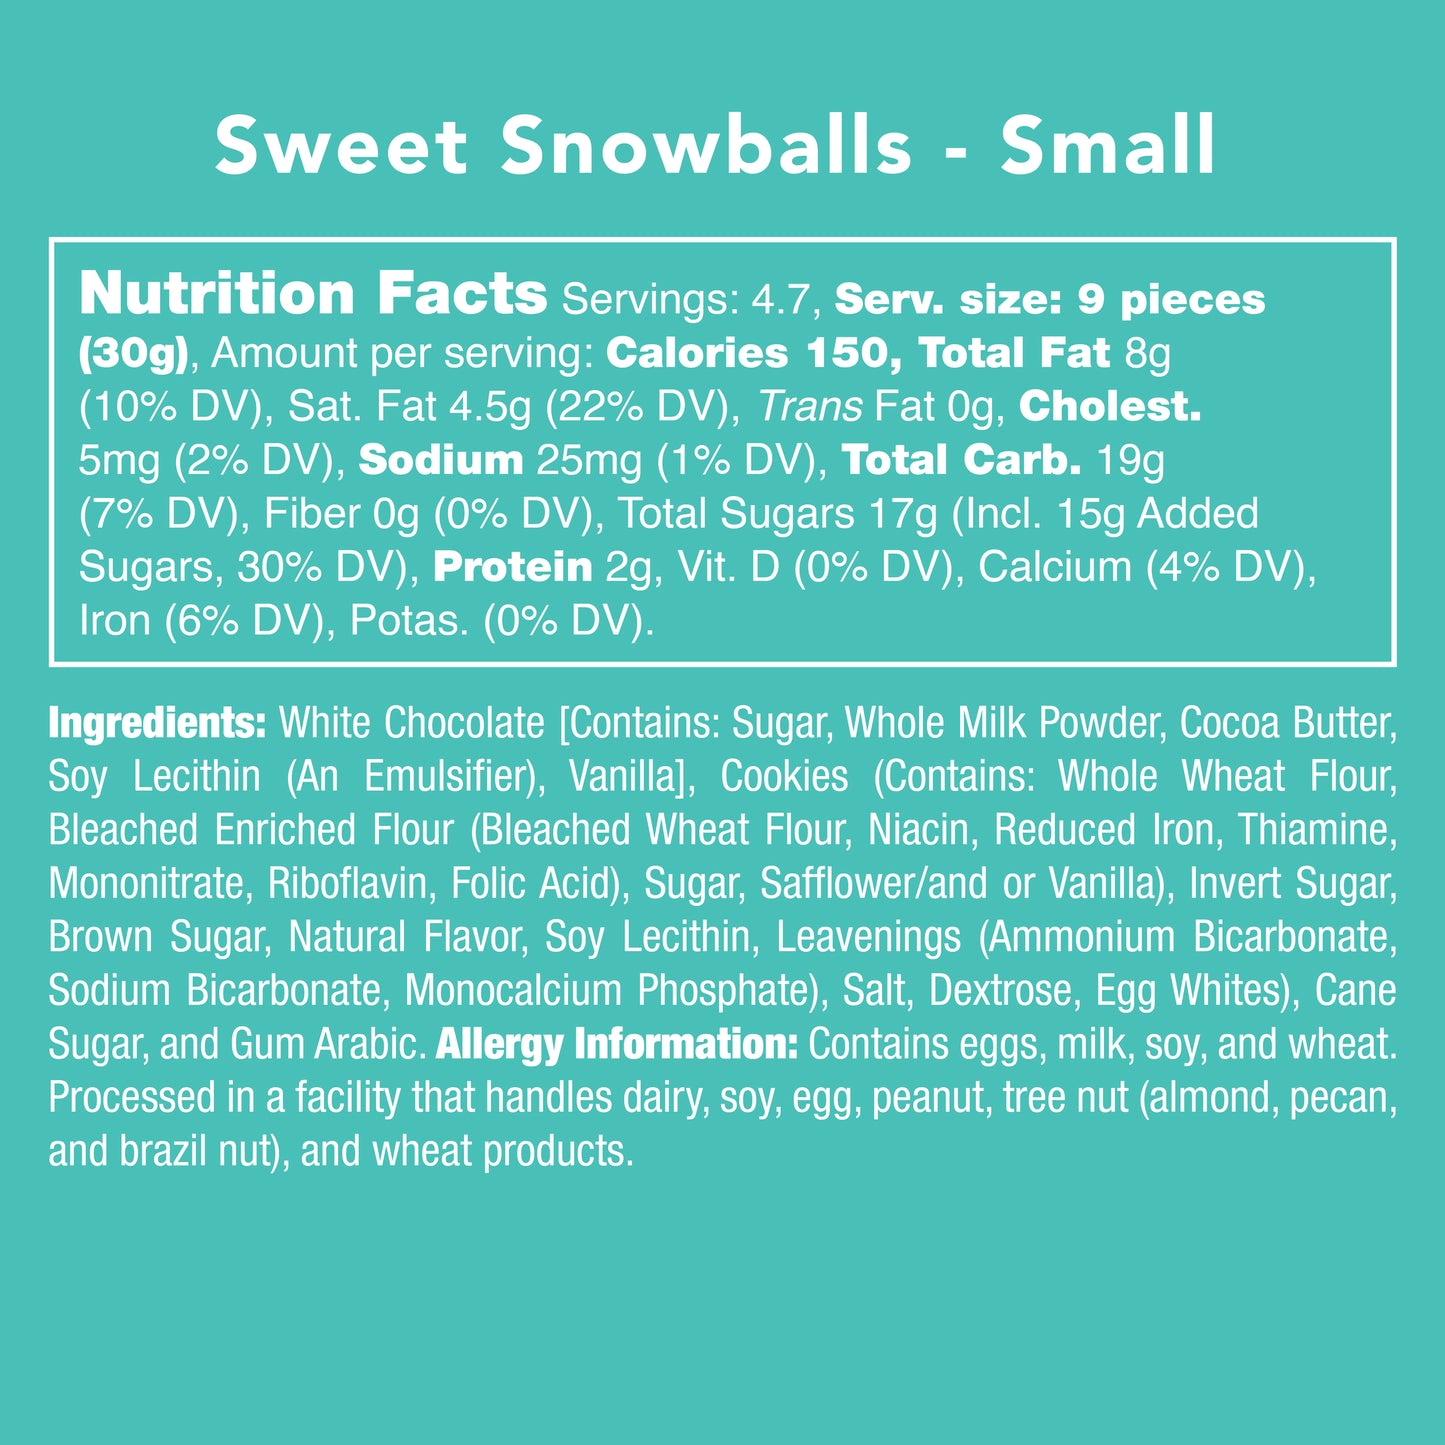 Sweet Snowballs - retail swag candy